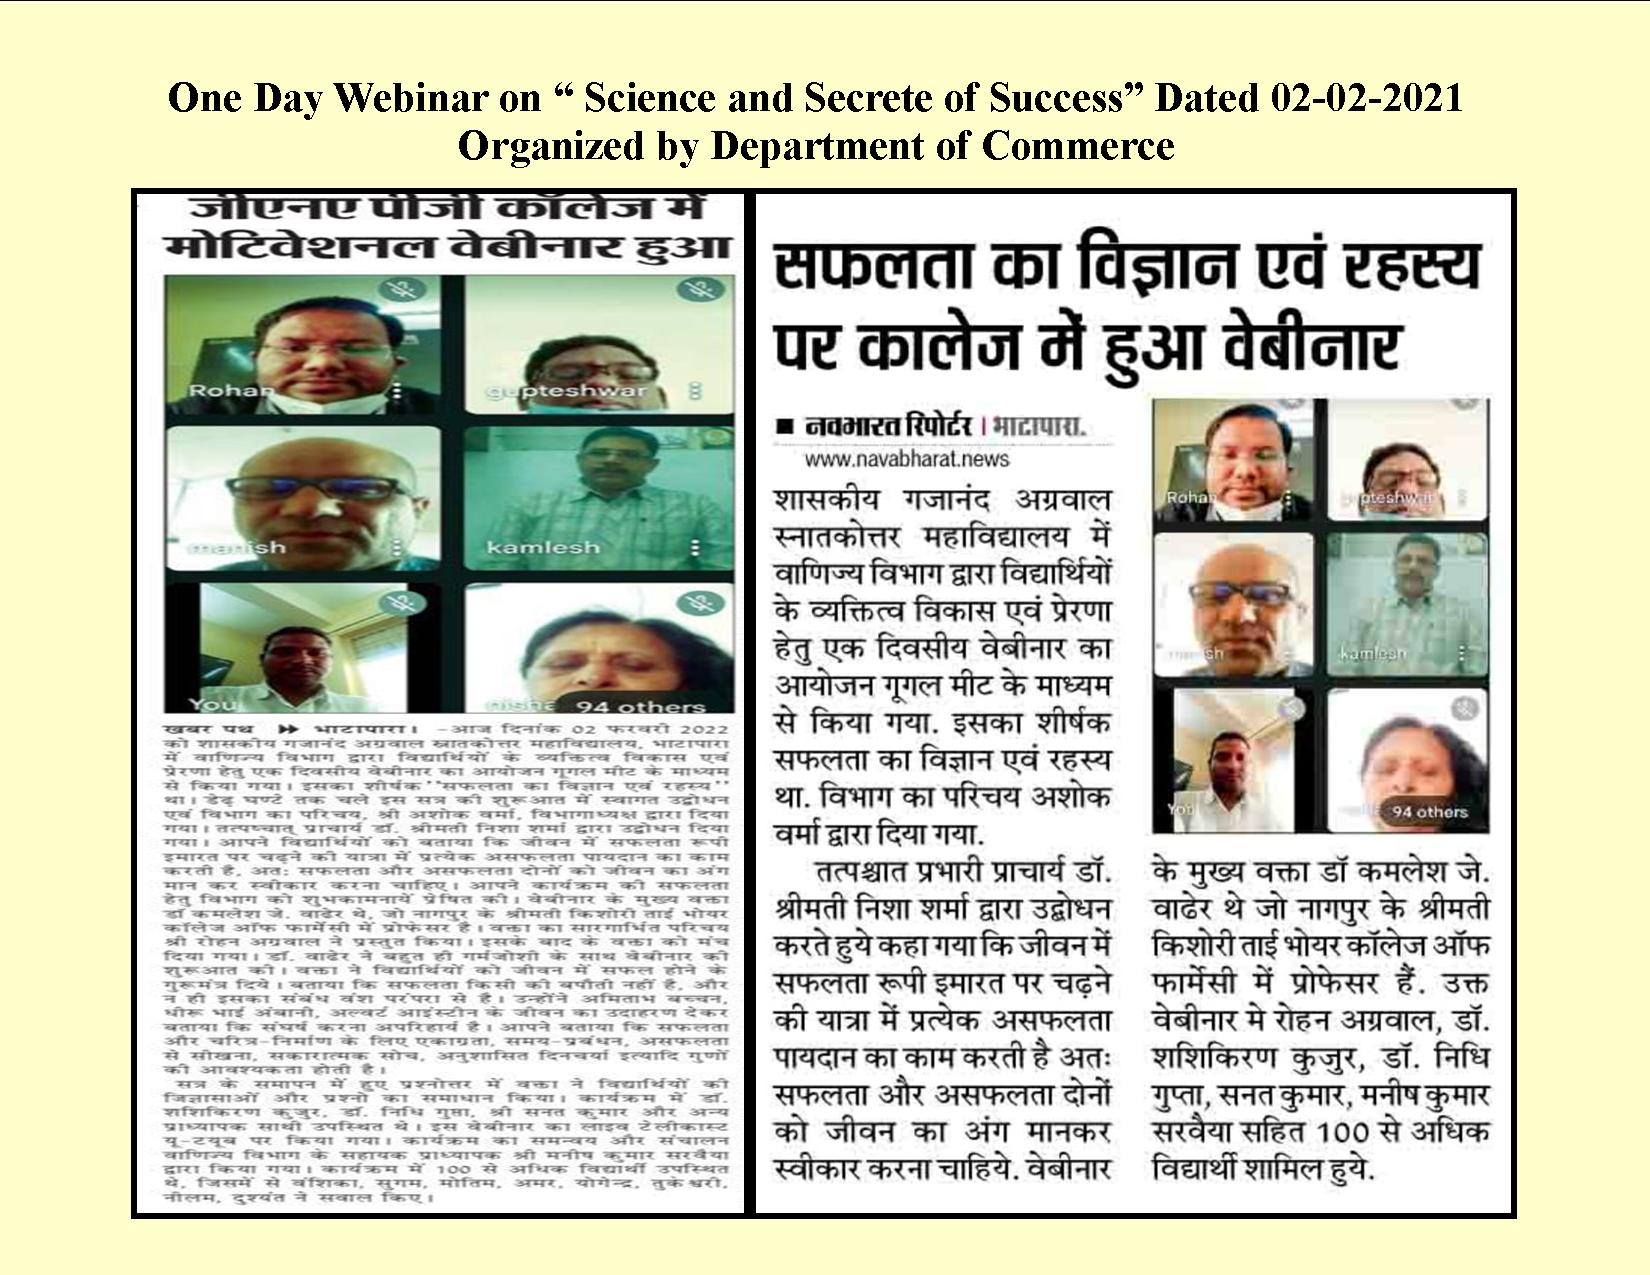 Govt. G. N. A. P.G. College, Bhatapara | Govt. College Bhatapara-One Day Webinar on “ Science and Secrete of Success” Dated 02-02-2021 Organized by Department of Commerce